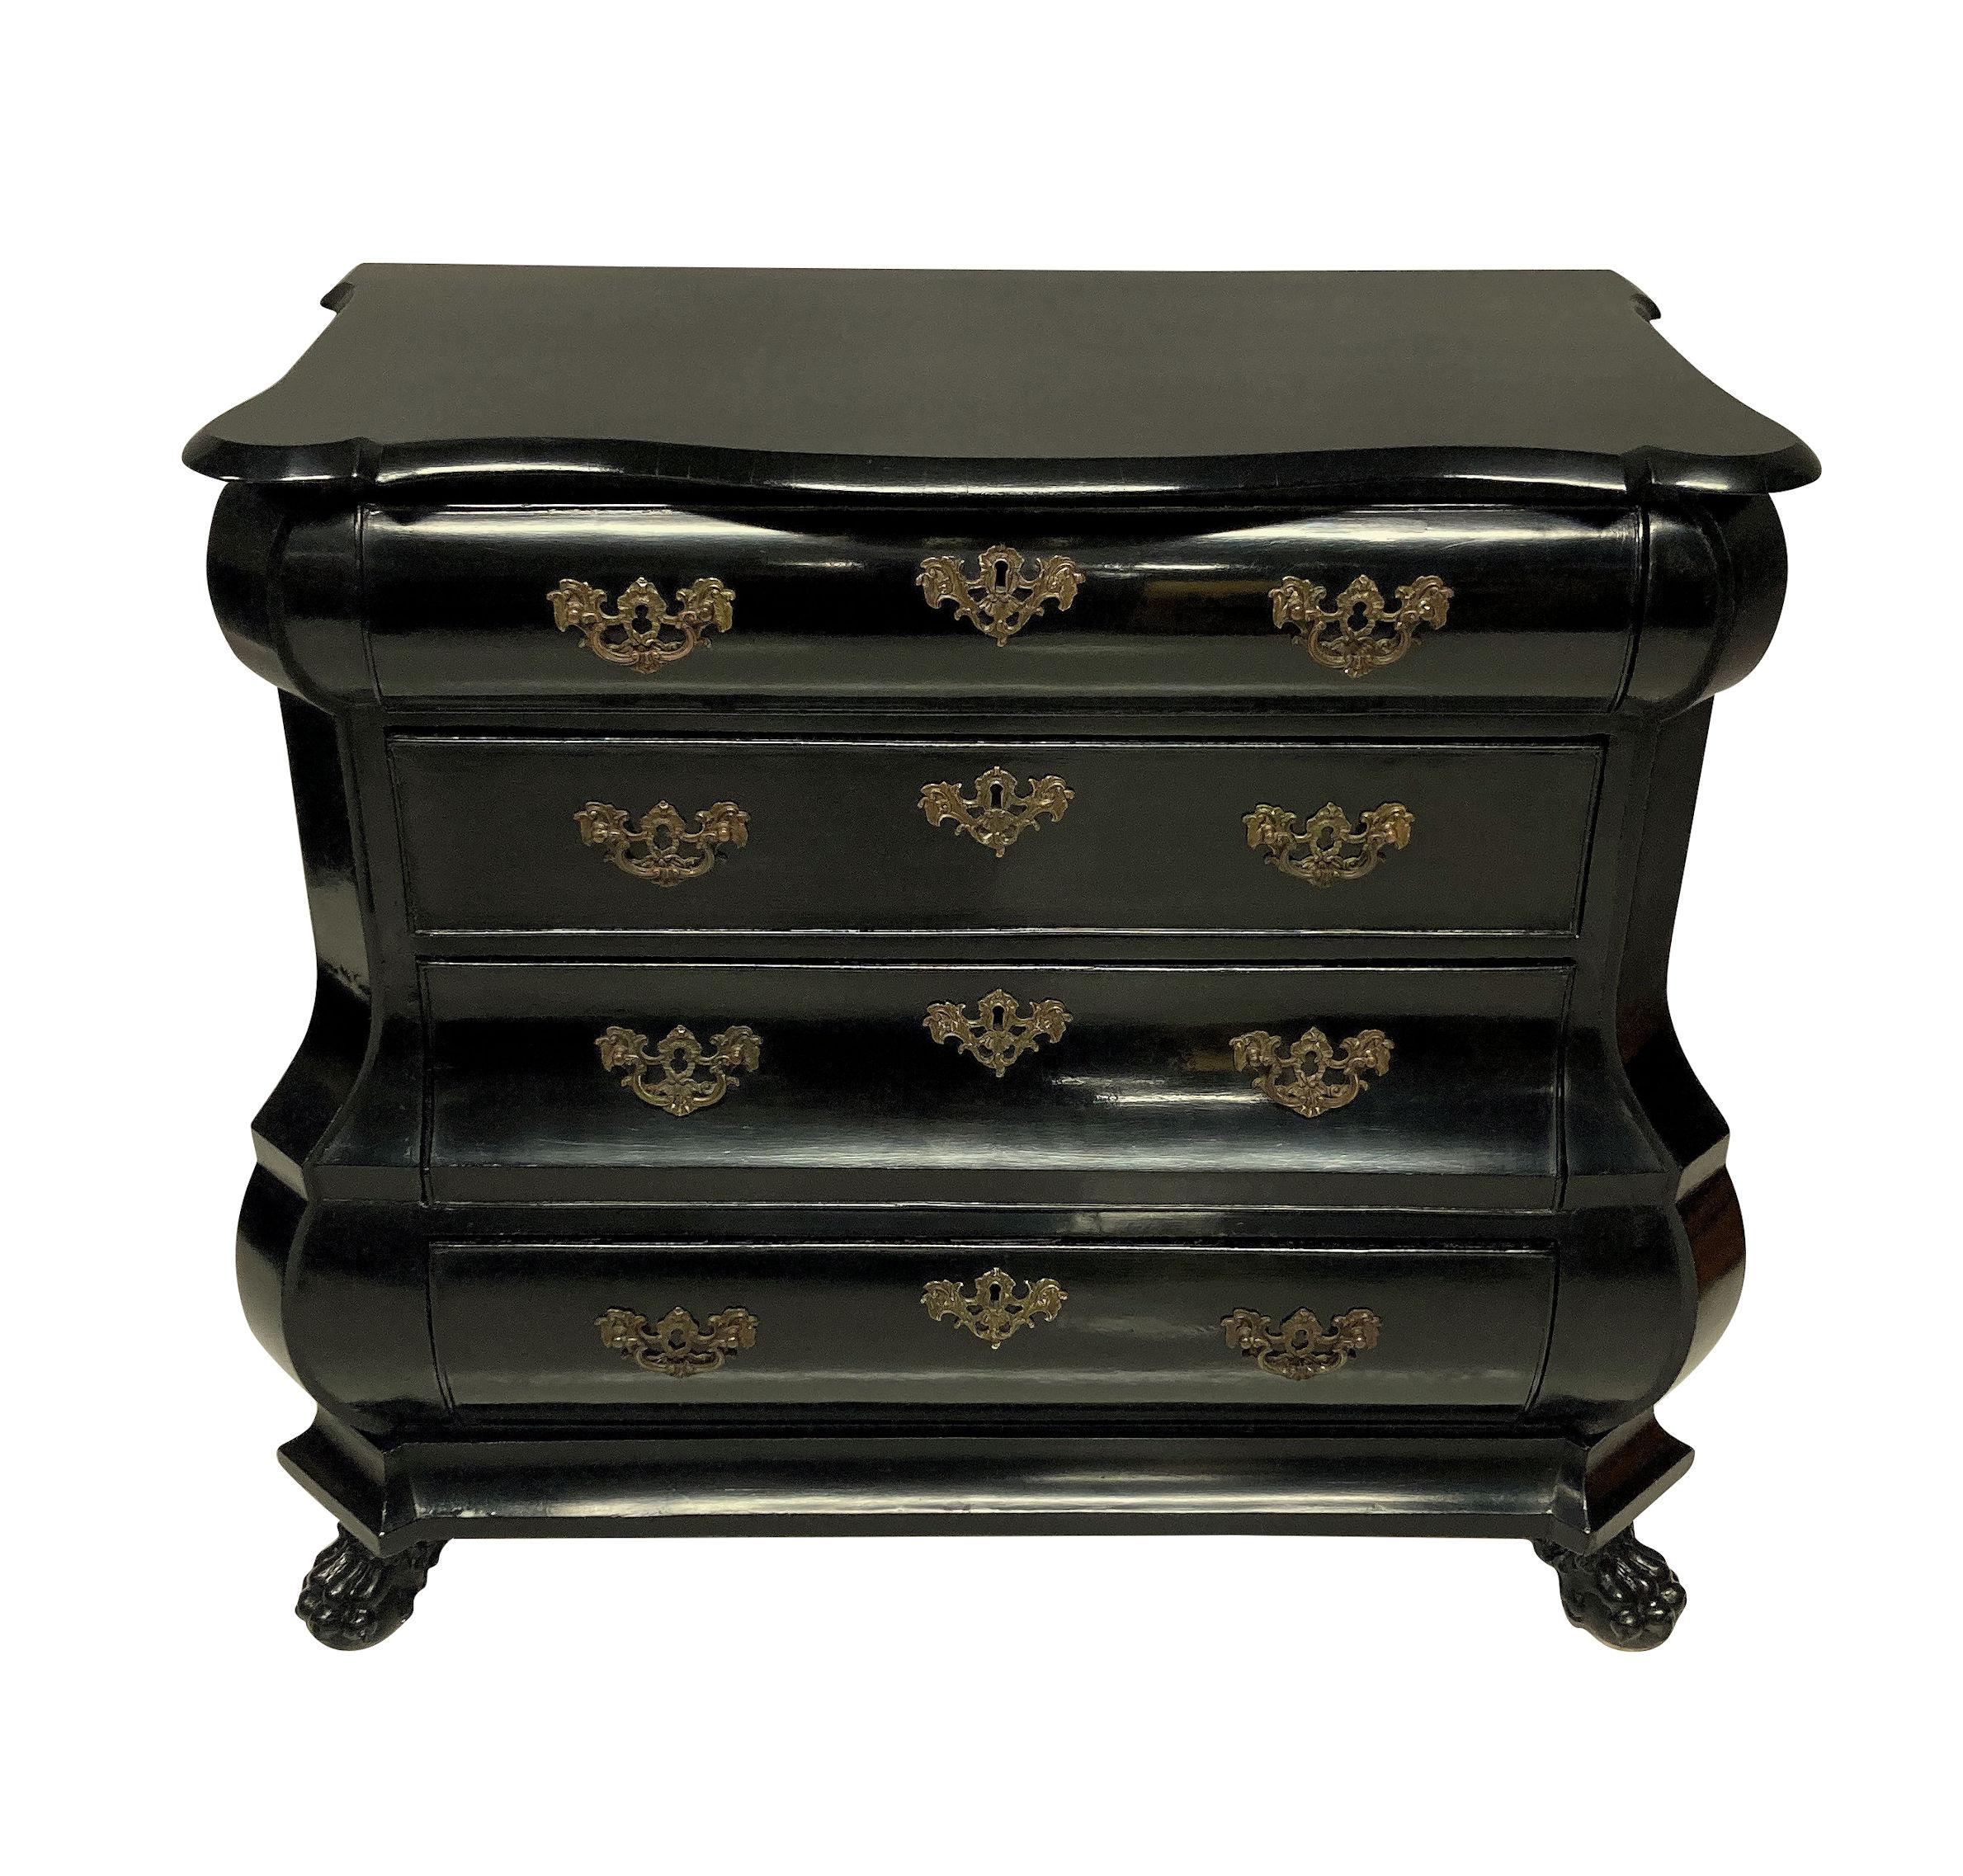 An early XIX century Dutch chest of drawers in ebonised walnut, with the original handles on four drawers and resting on paw feet.